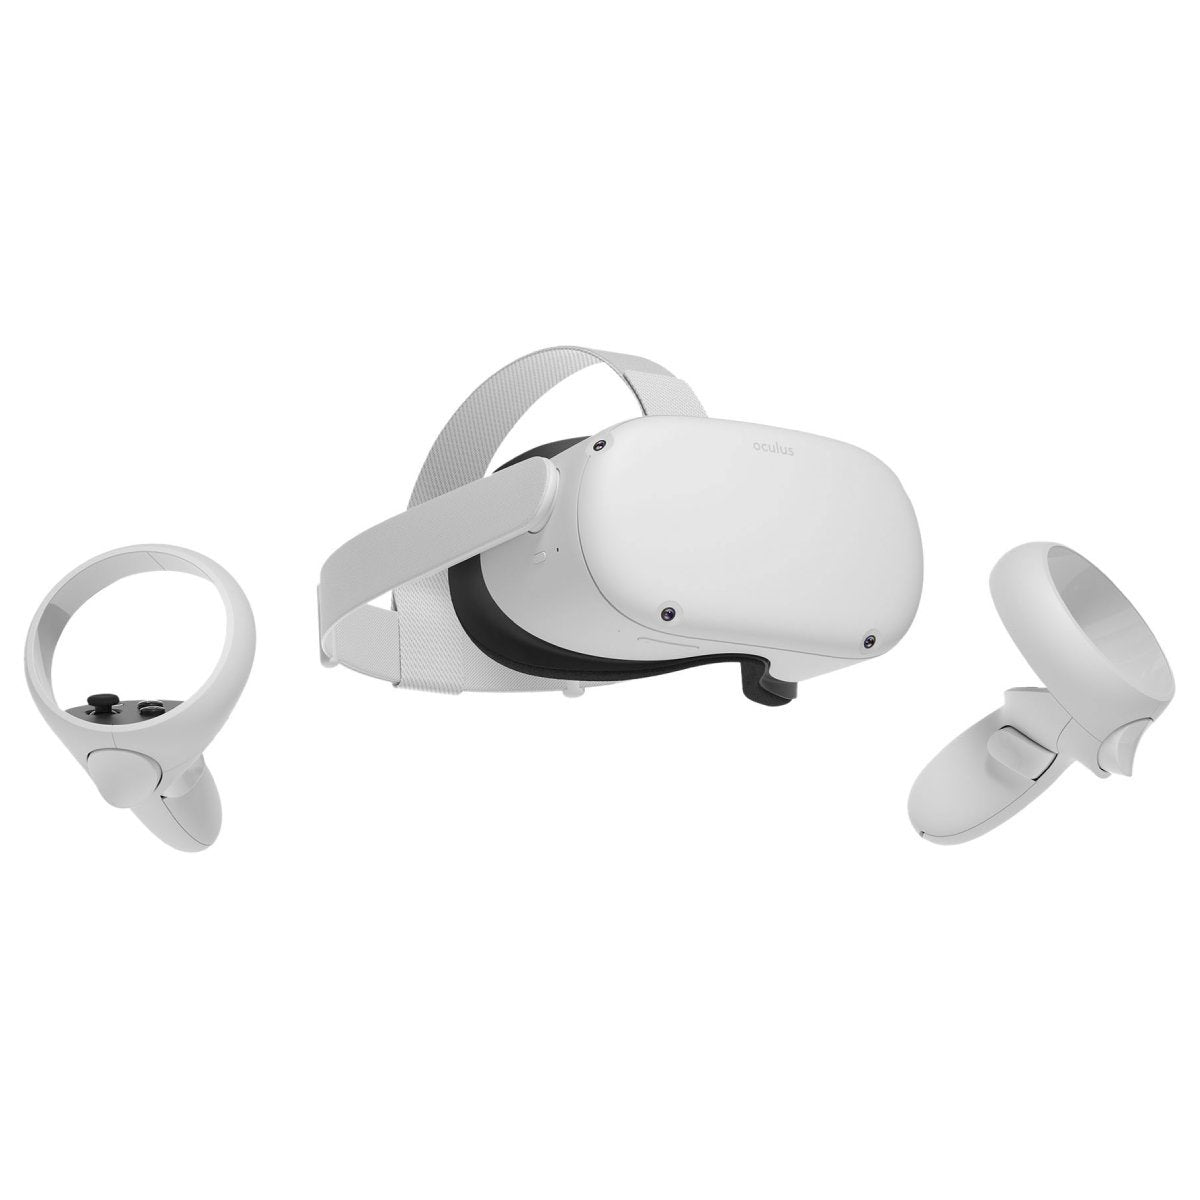 Meta Quest 2 Advanced All-In-One 256GB Virtual Reality Headset- Gray - Store 974 | ستور ٩٧٤